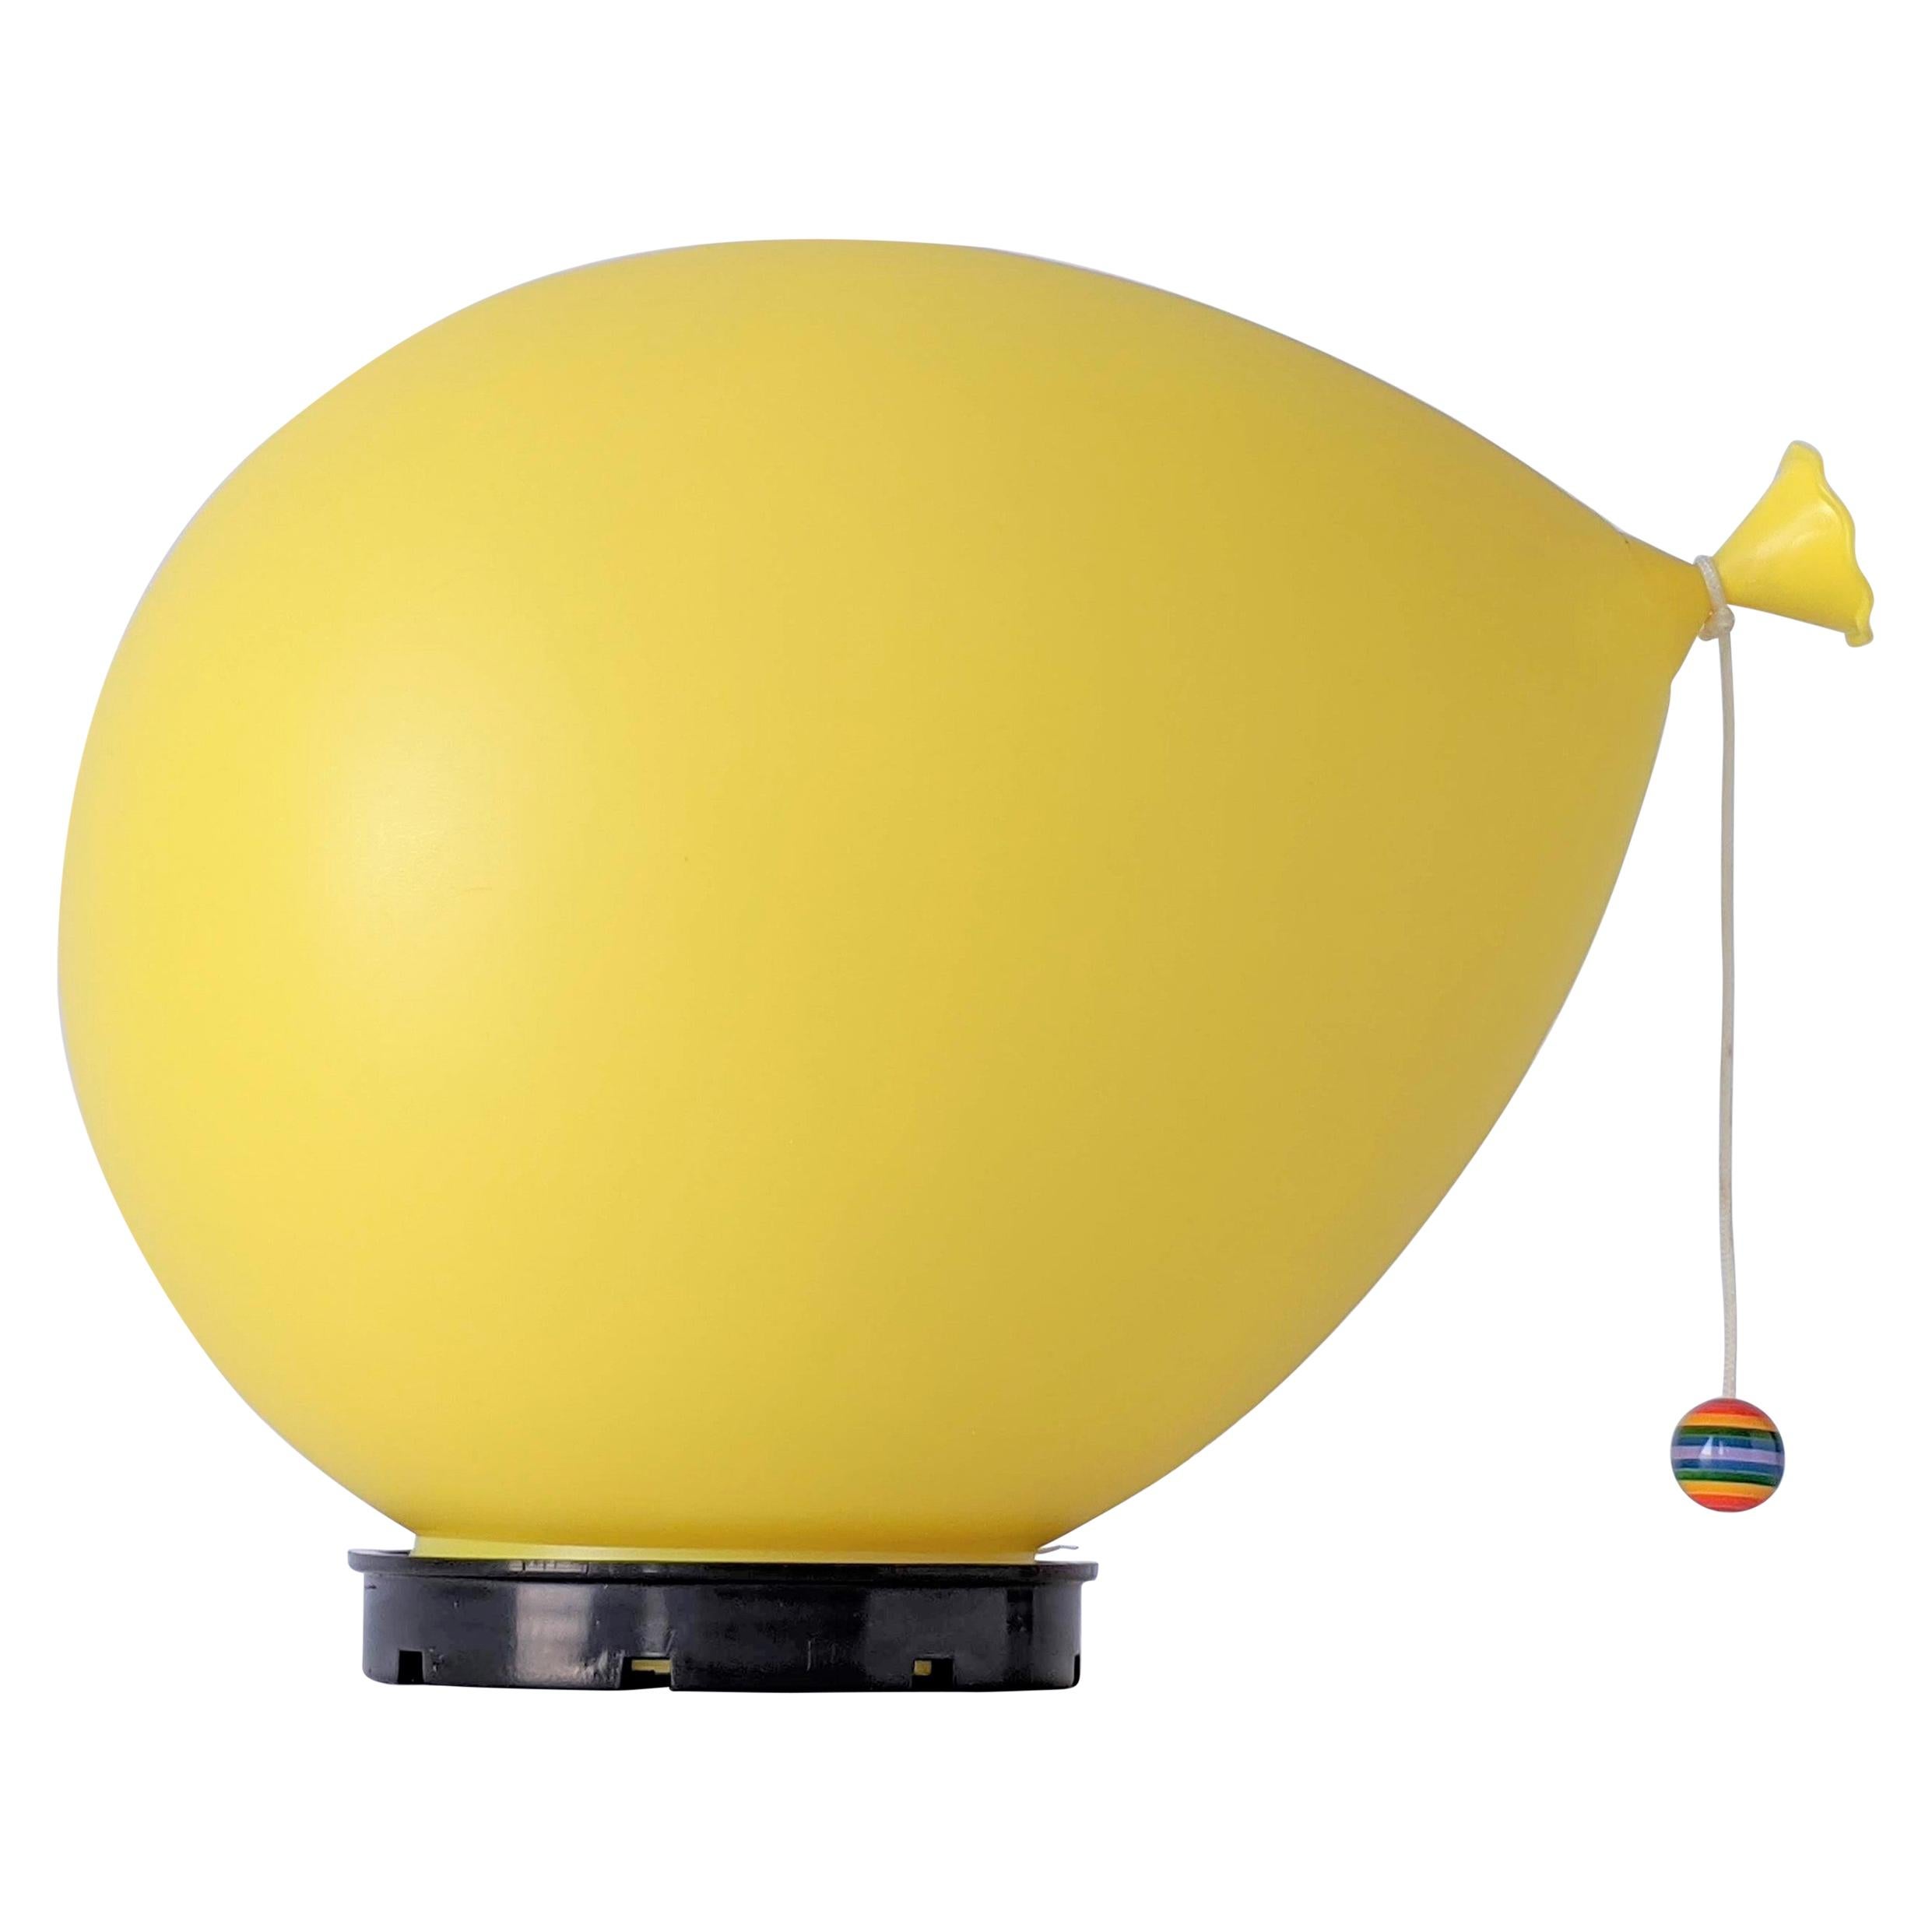 1970s Table, Wall or Ceiling Ballon Lamp by Yves Christin, Italy